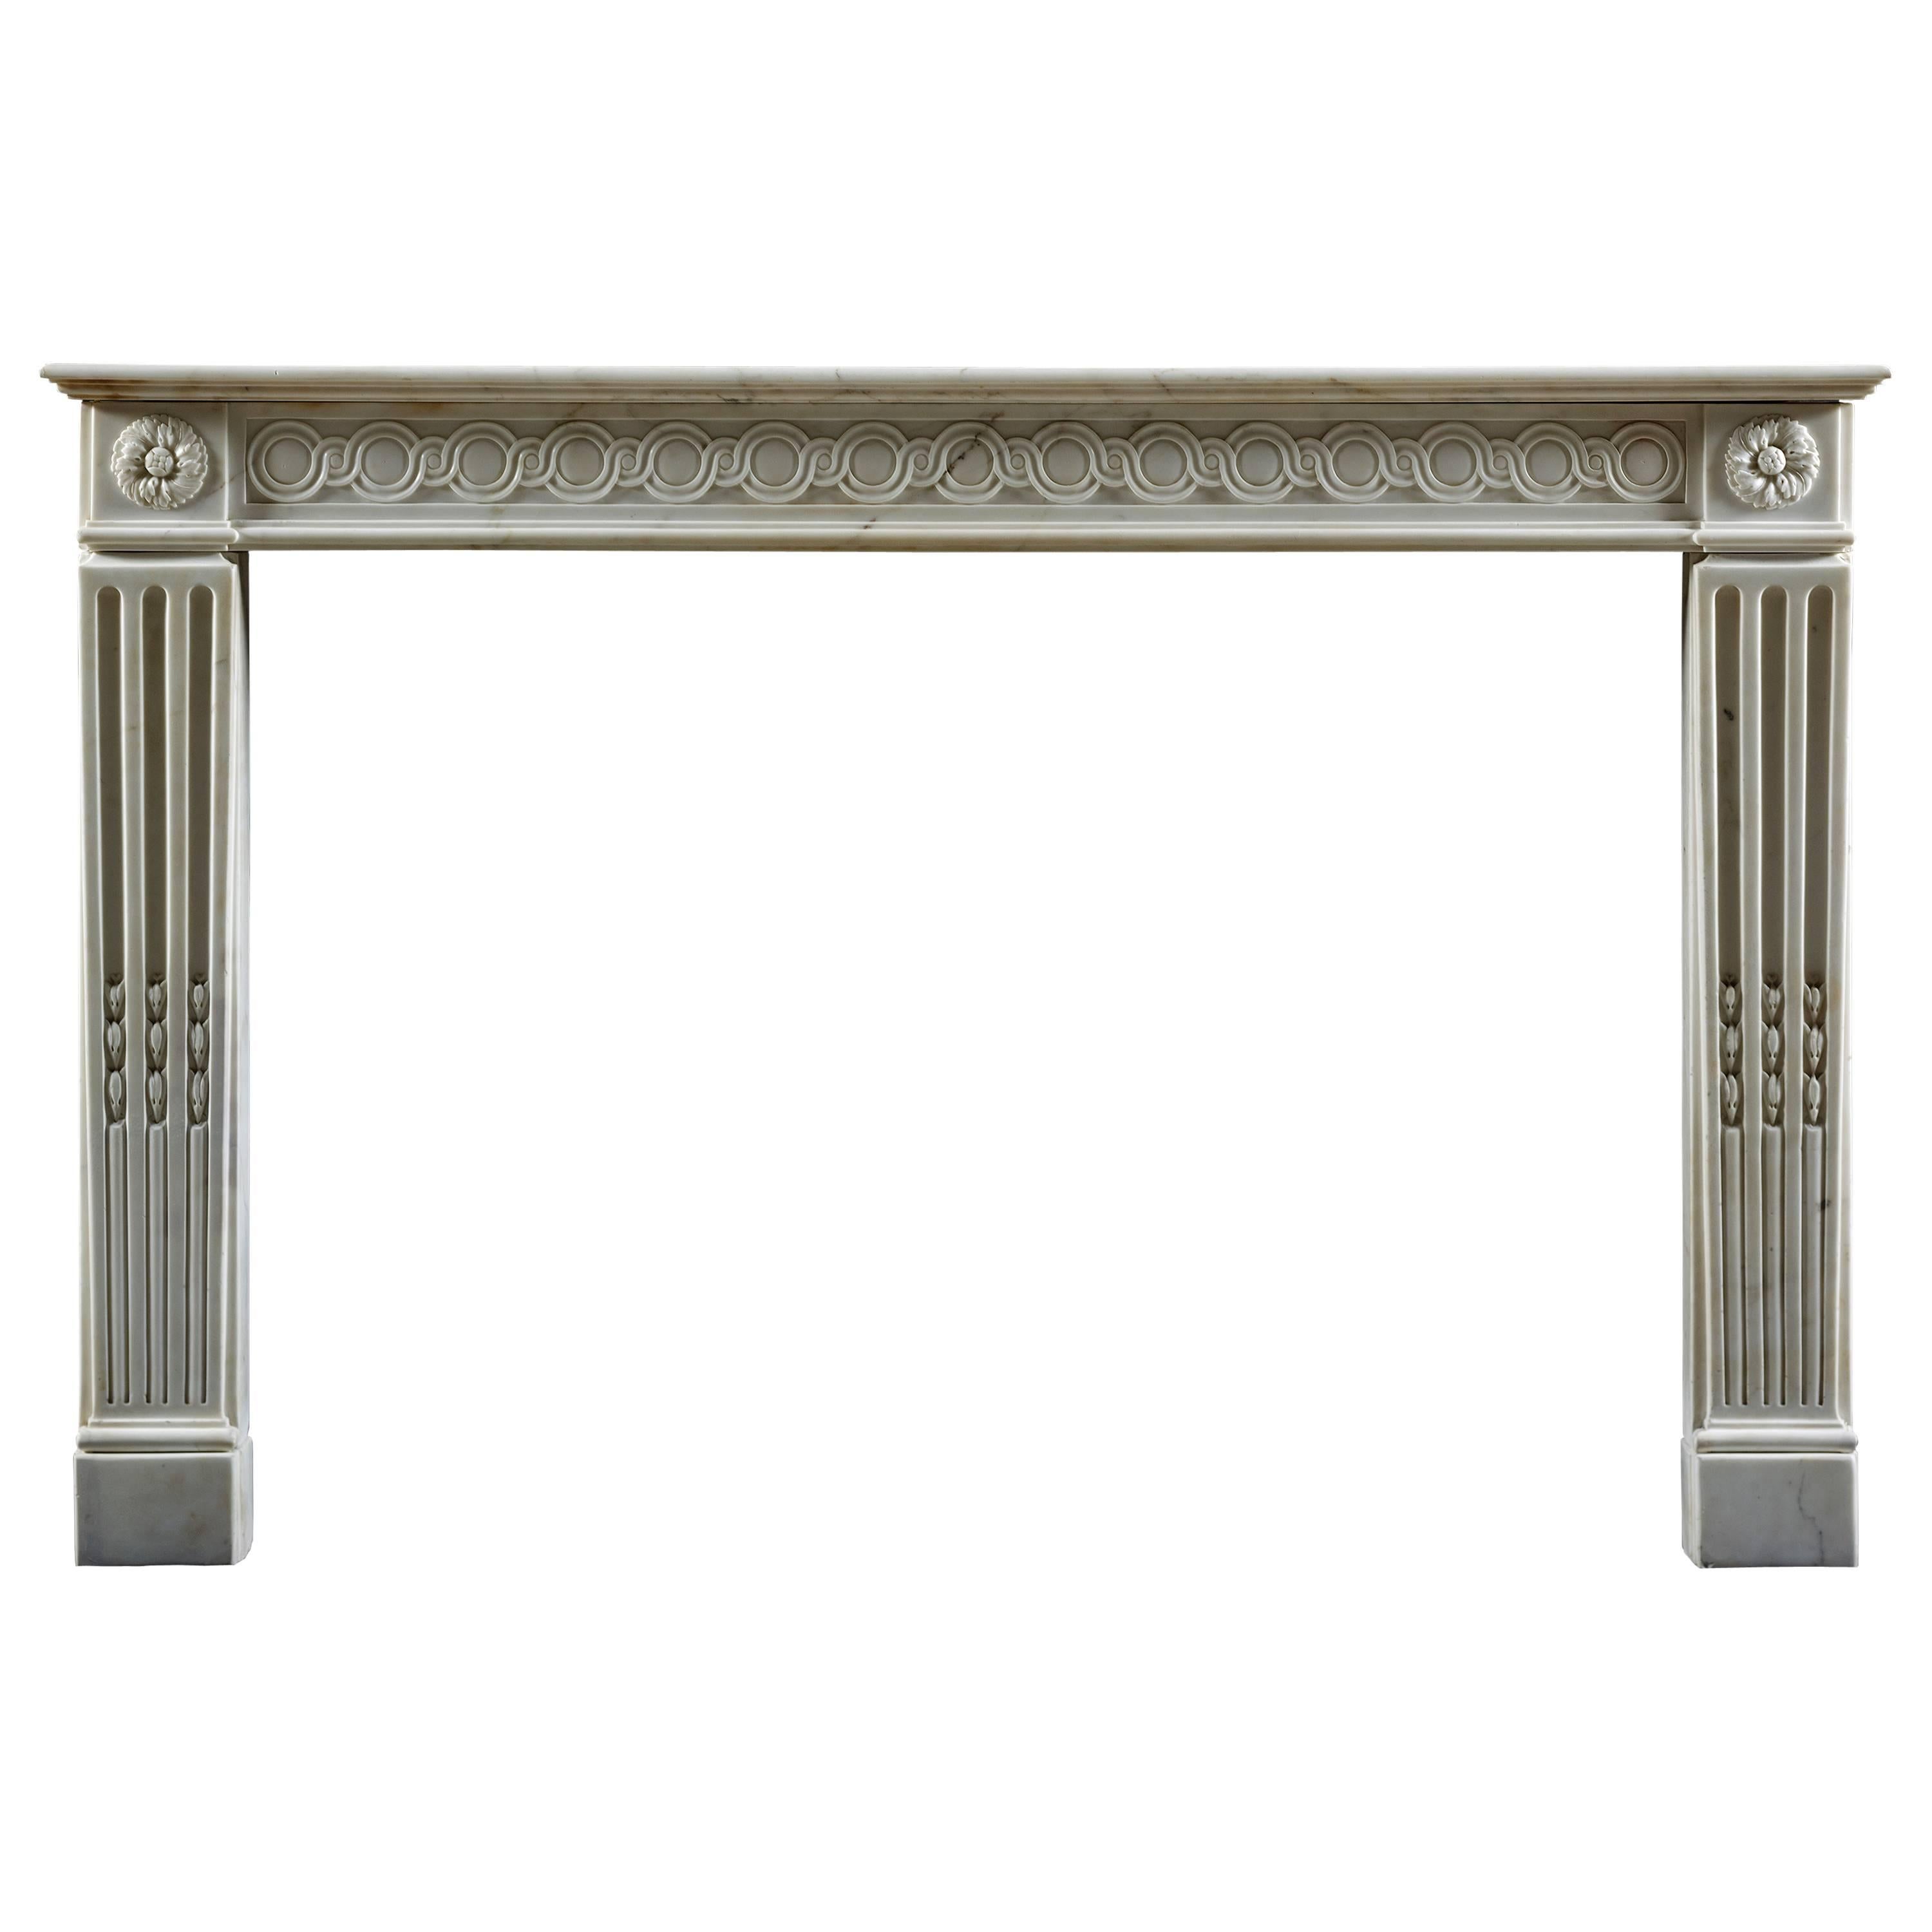 Rare and Very High Quality Antique 18th Century French Fireplace Mantel For Sale